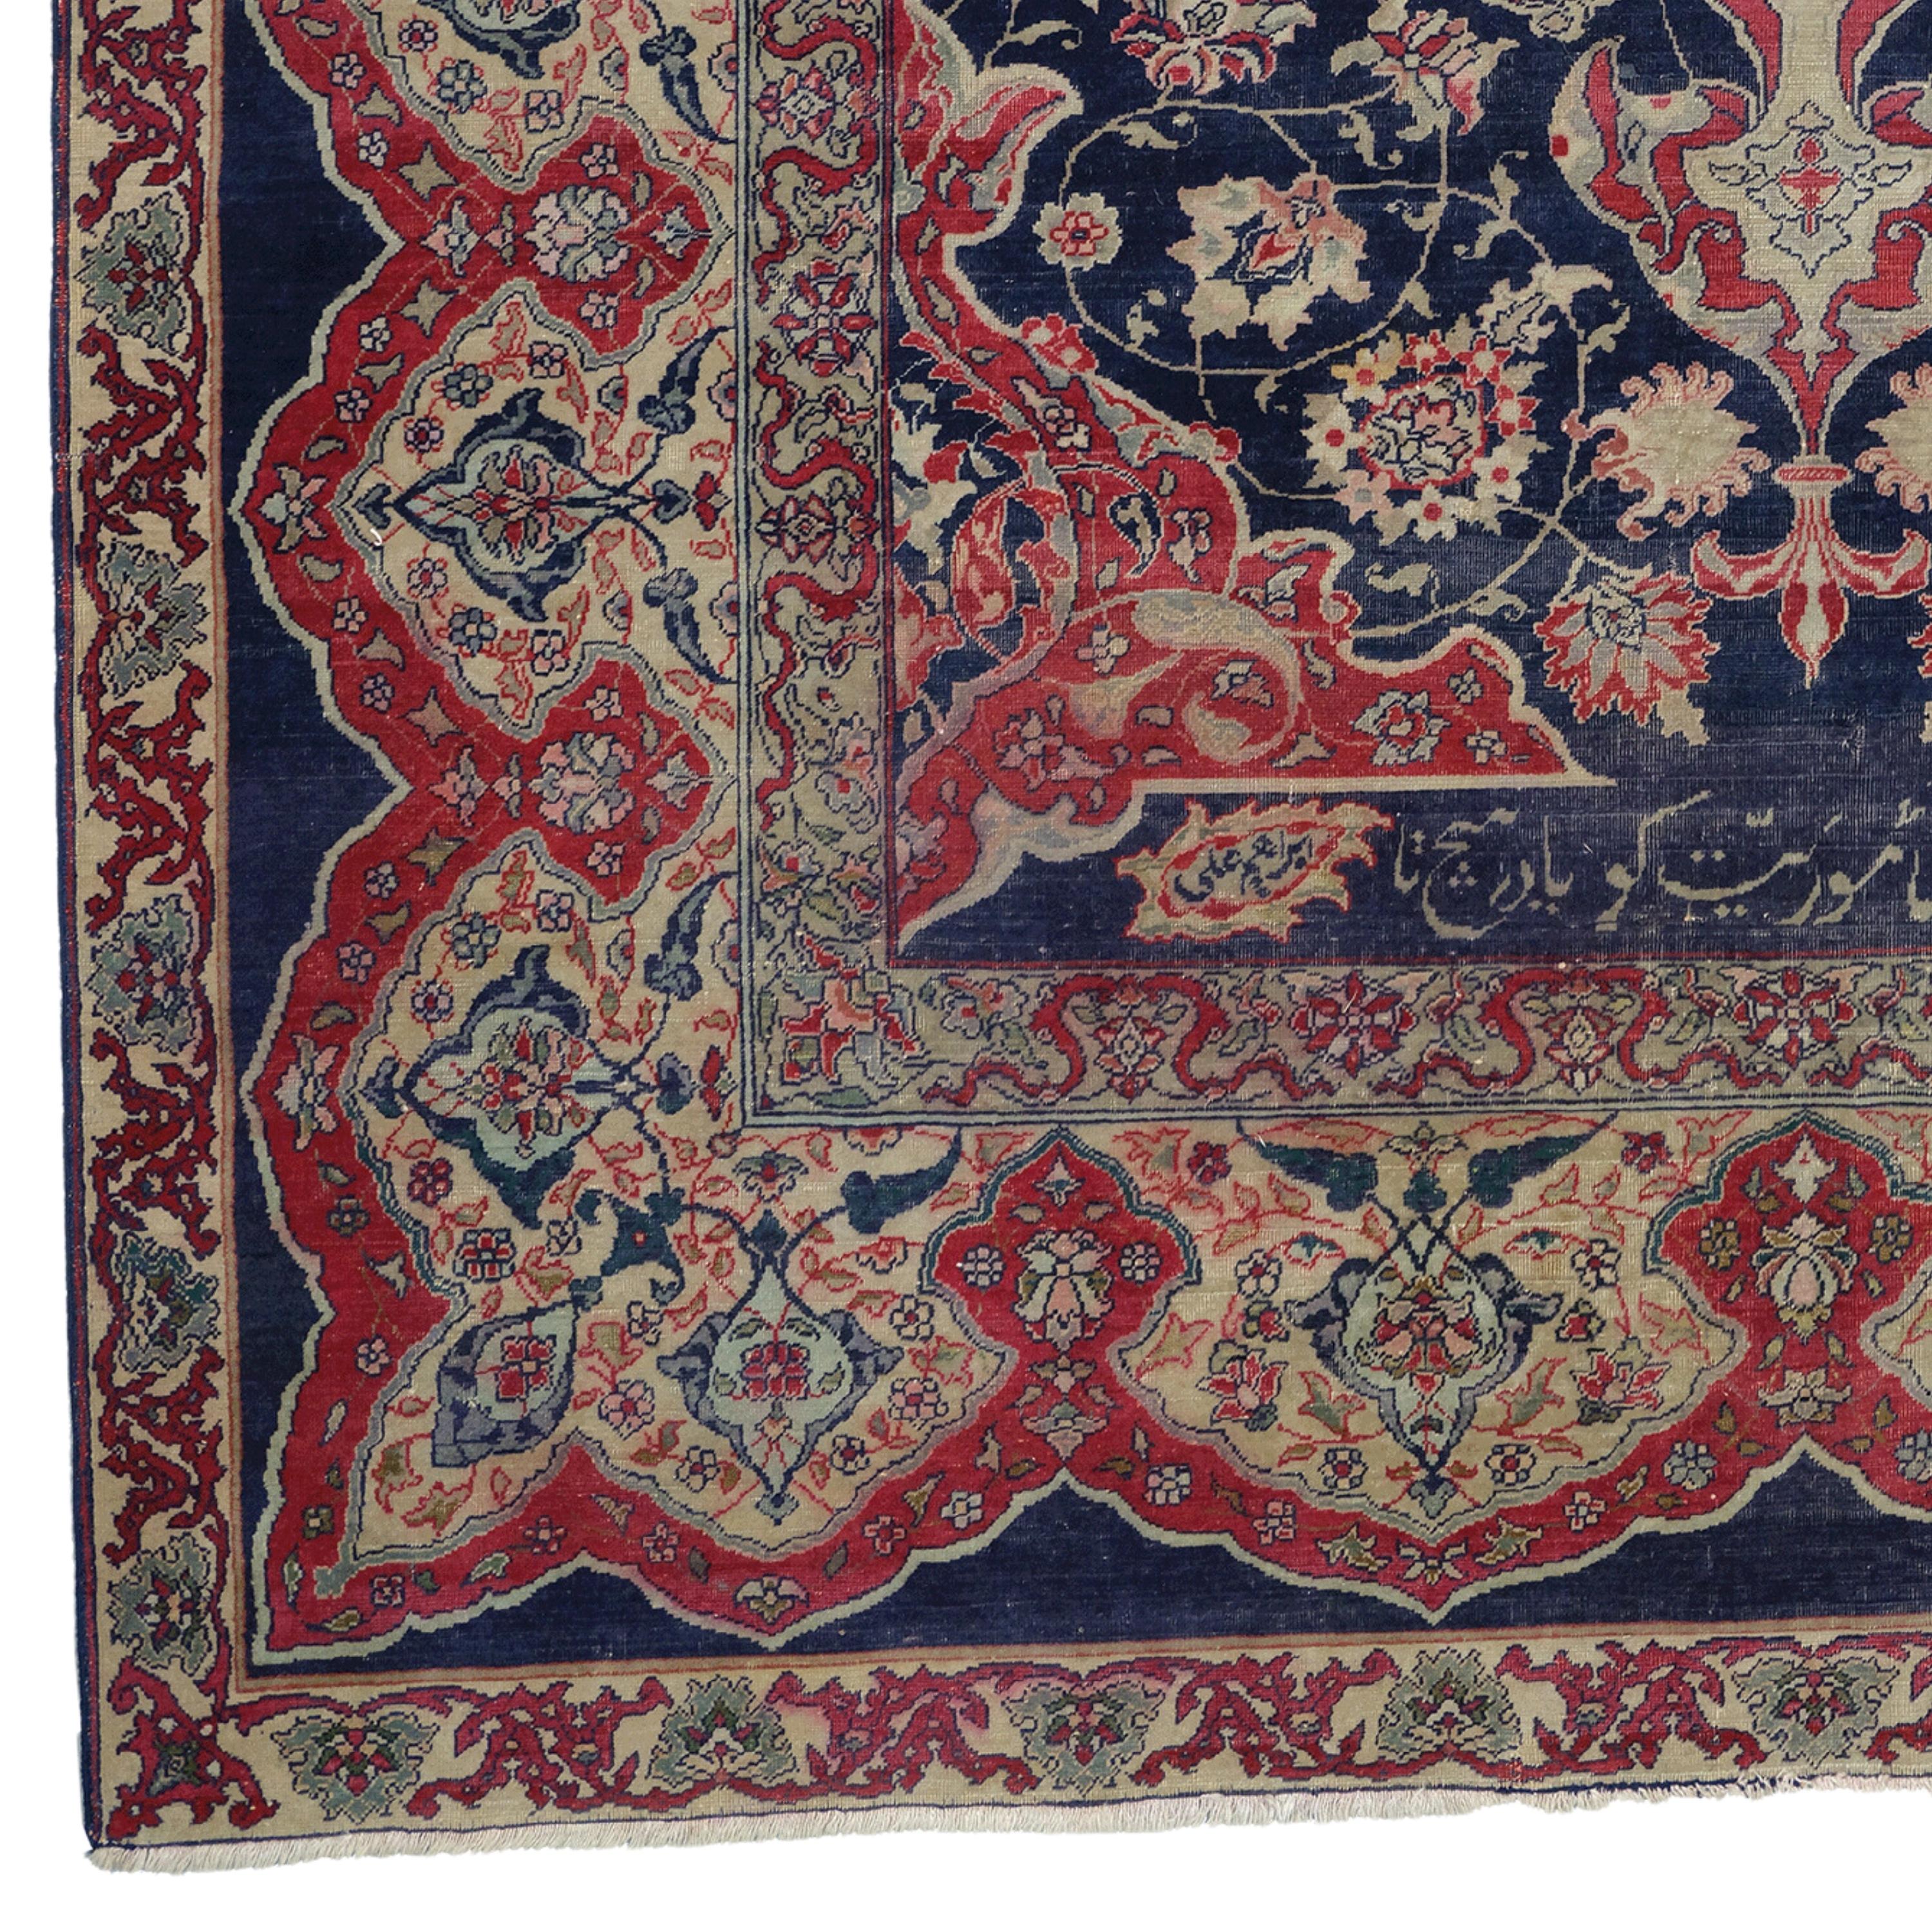 A Signed Feshane Rug  Anatolian Rug
Late 19th Century Ottoman Period Signed Feshane Rug

High quality carpets were produced for the Ottoman court in both Hereke and Feshâne in the second half of the 19th century. In Defterdar near Eyüp in Istanbul a